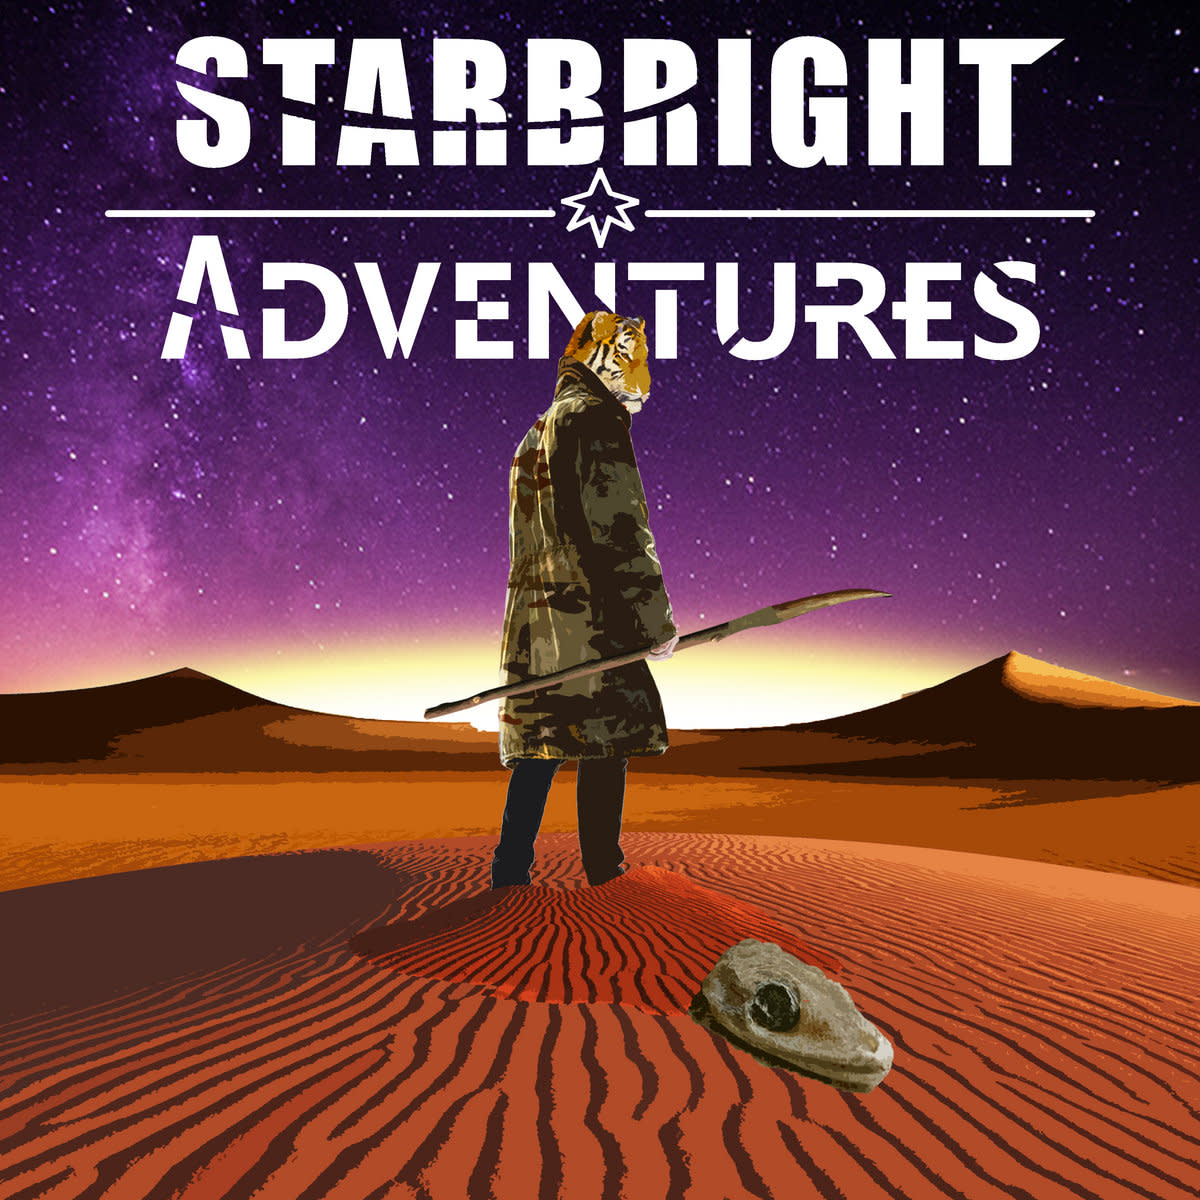 synth-album-review-starbright-adventures-by-powerkrd